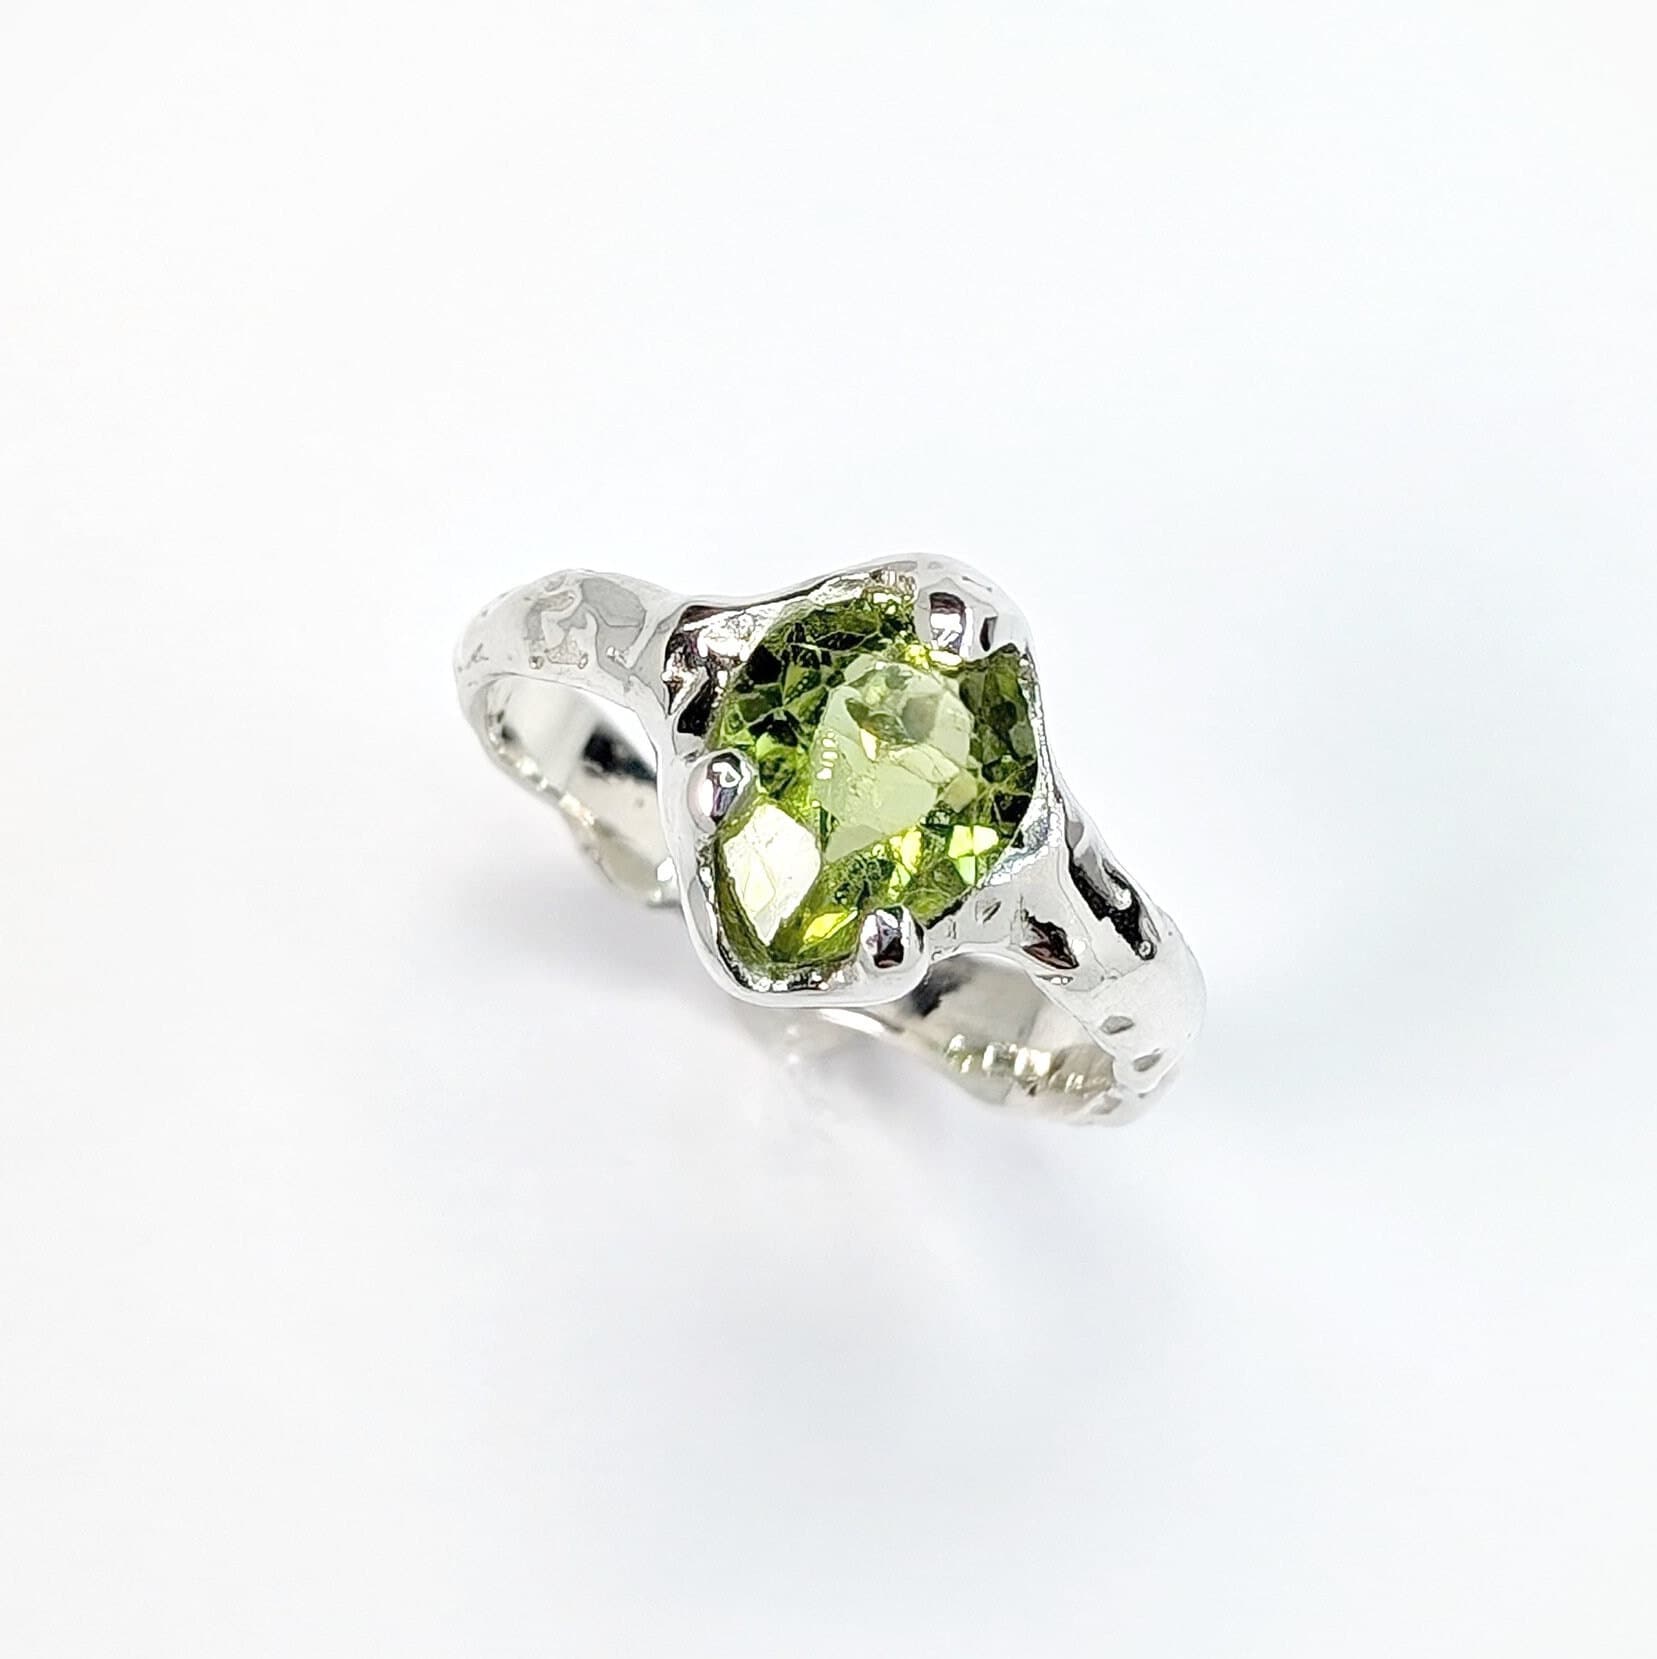 Large Pear shape Peridot set by prongs on a textured Molten Solid Sterling Silver band